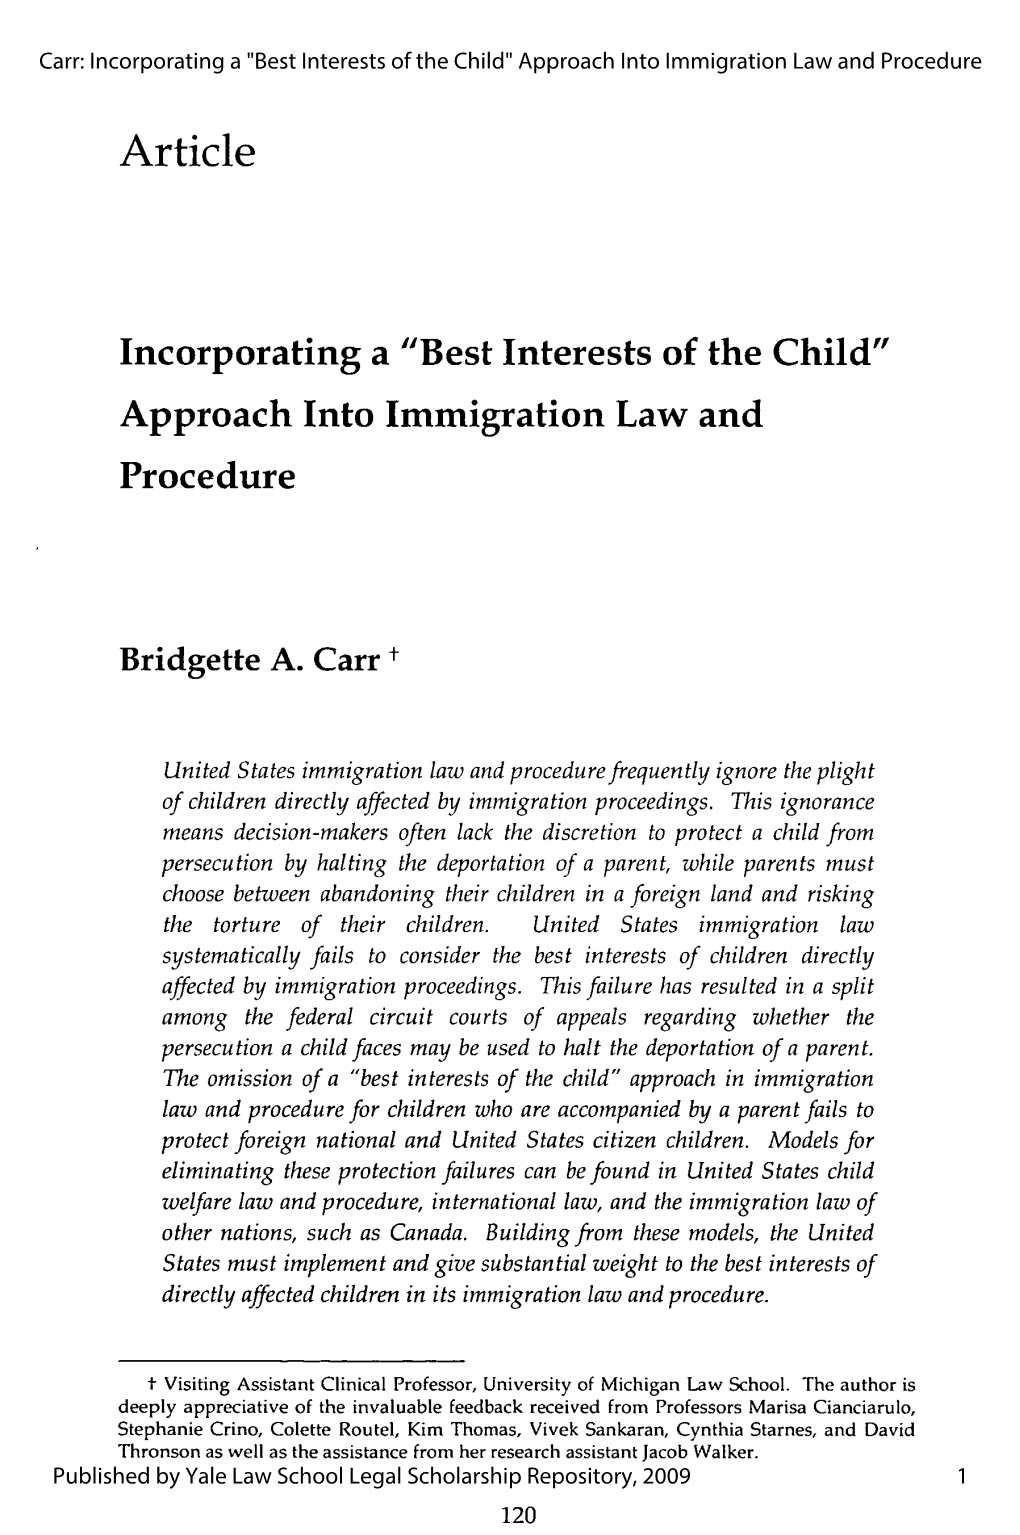 Best Interests of the Child" Approach Into Immigration Law and Procedure